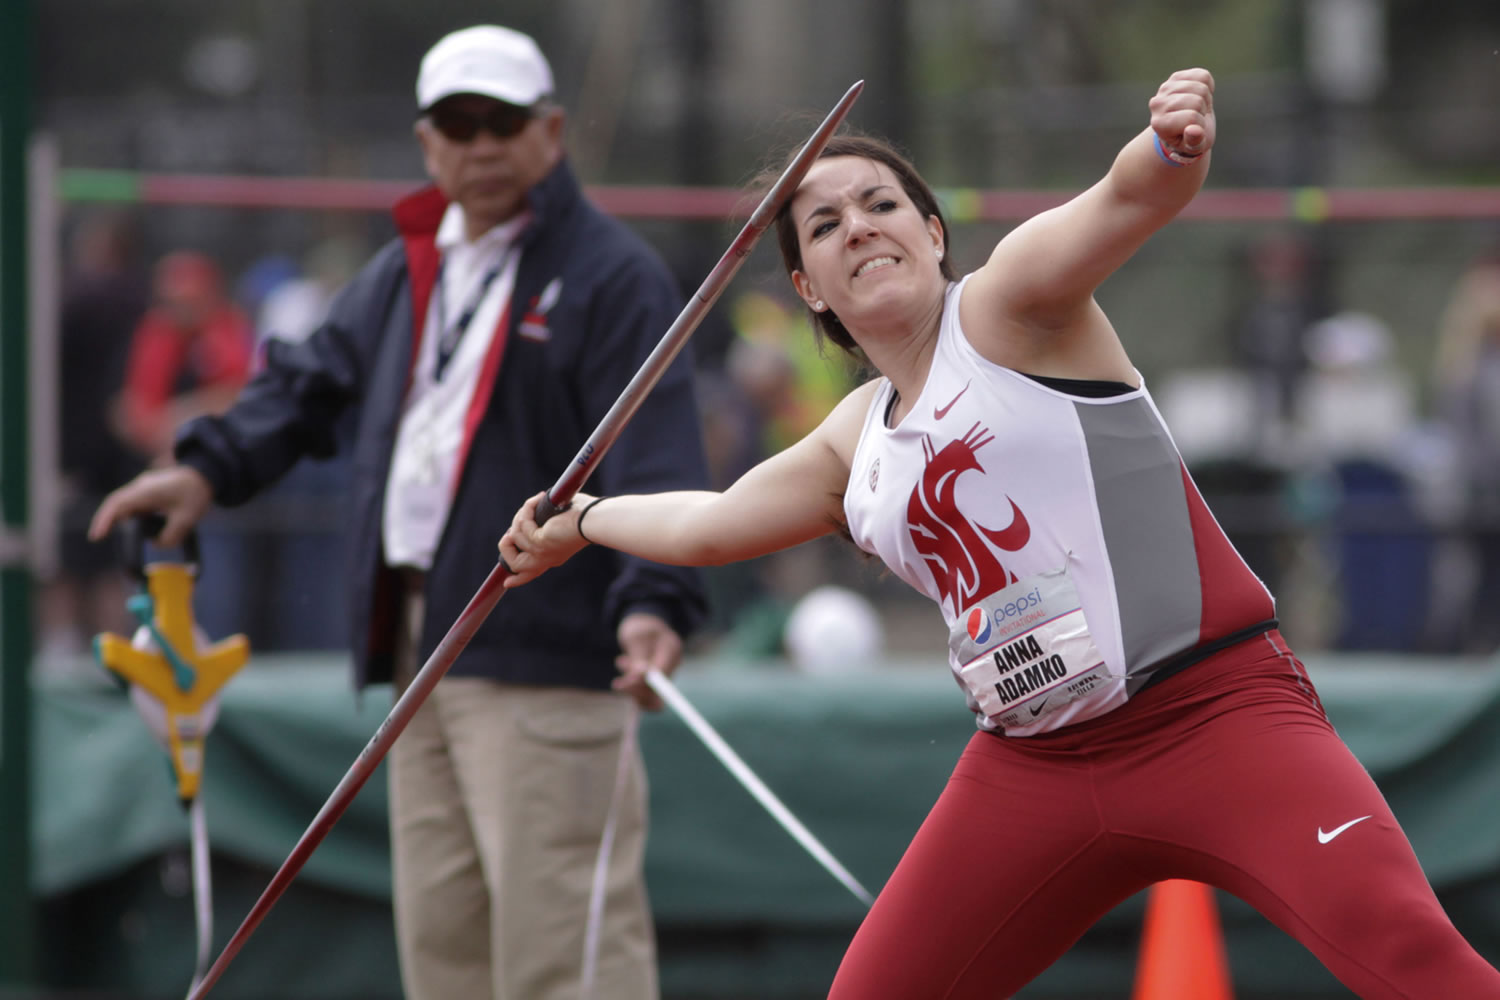 Washington State sophomore Anna Adamko will compete at the NCAA Division I Outdoor Track and Field West Regional on May 23-25 at the University of Texas.